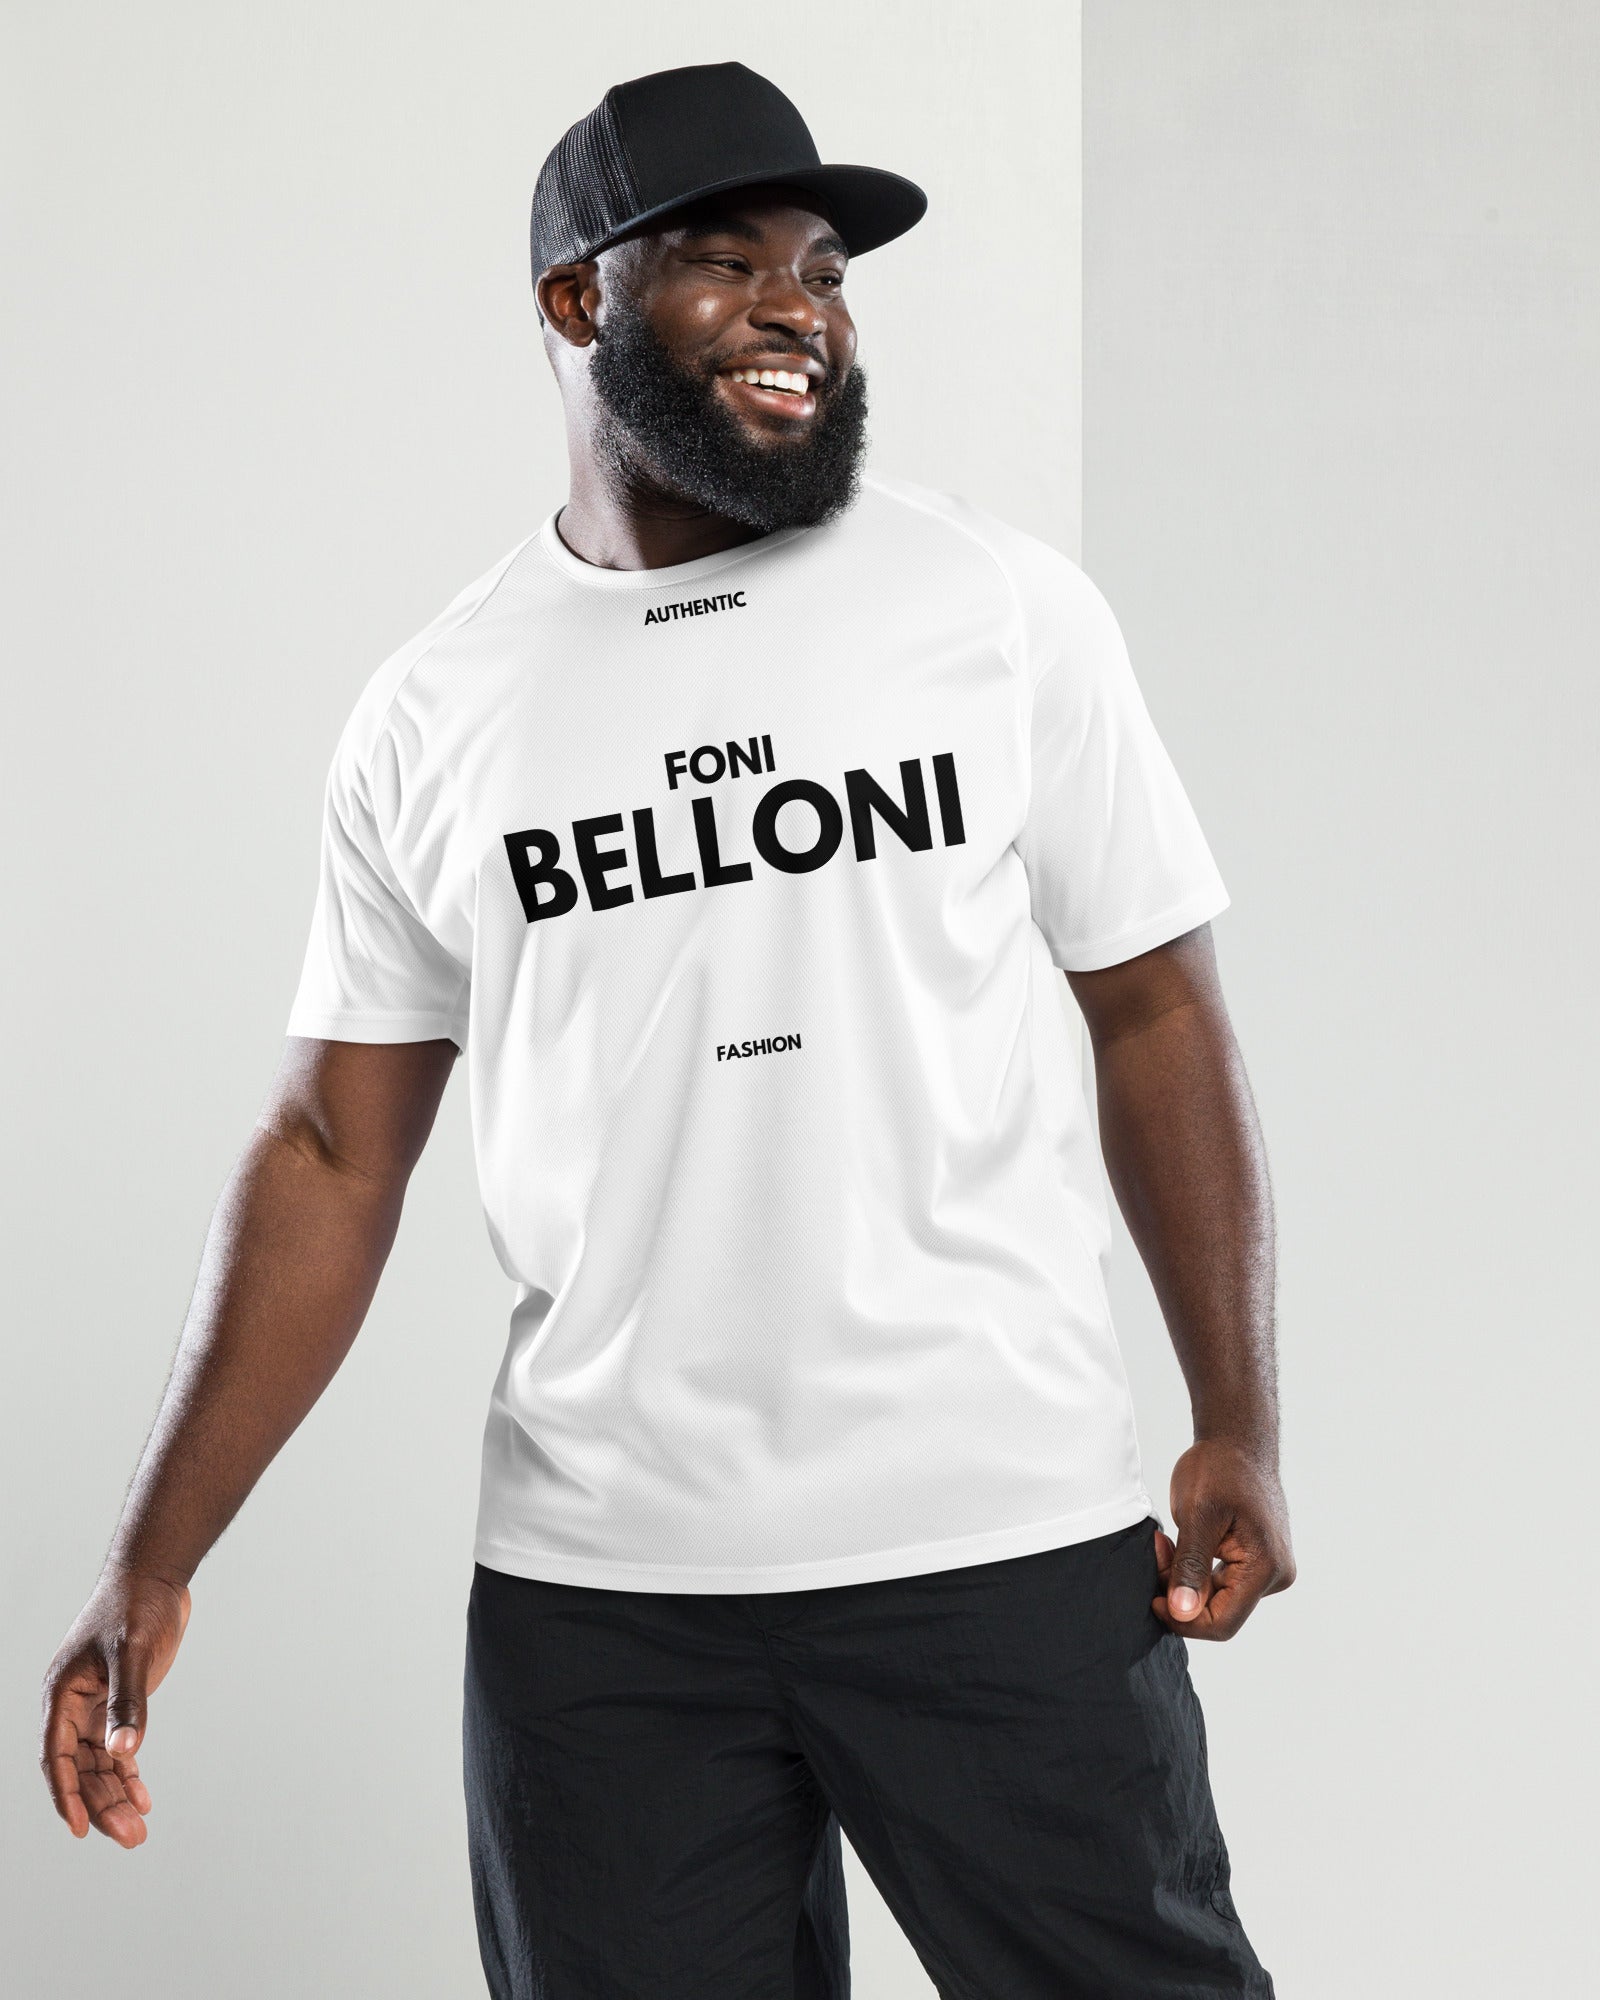 The fabulous items from our Foni Belloni Authentic Fashion collection are a joy to wear. Only the most fashionable can live a Foni Belloni lifestyle. Become 100% Foni Belloni. 